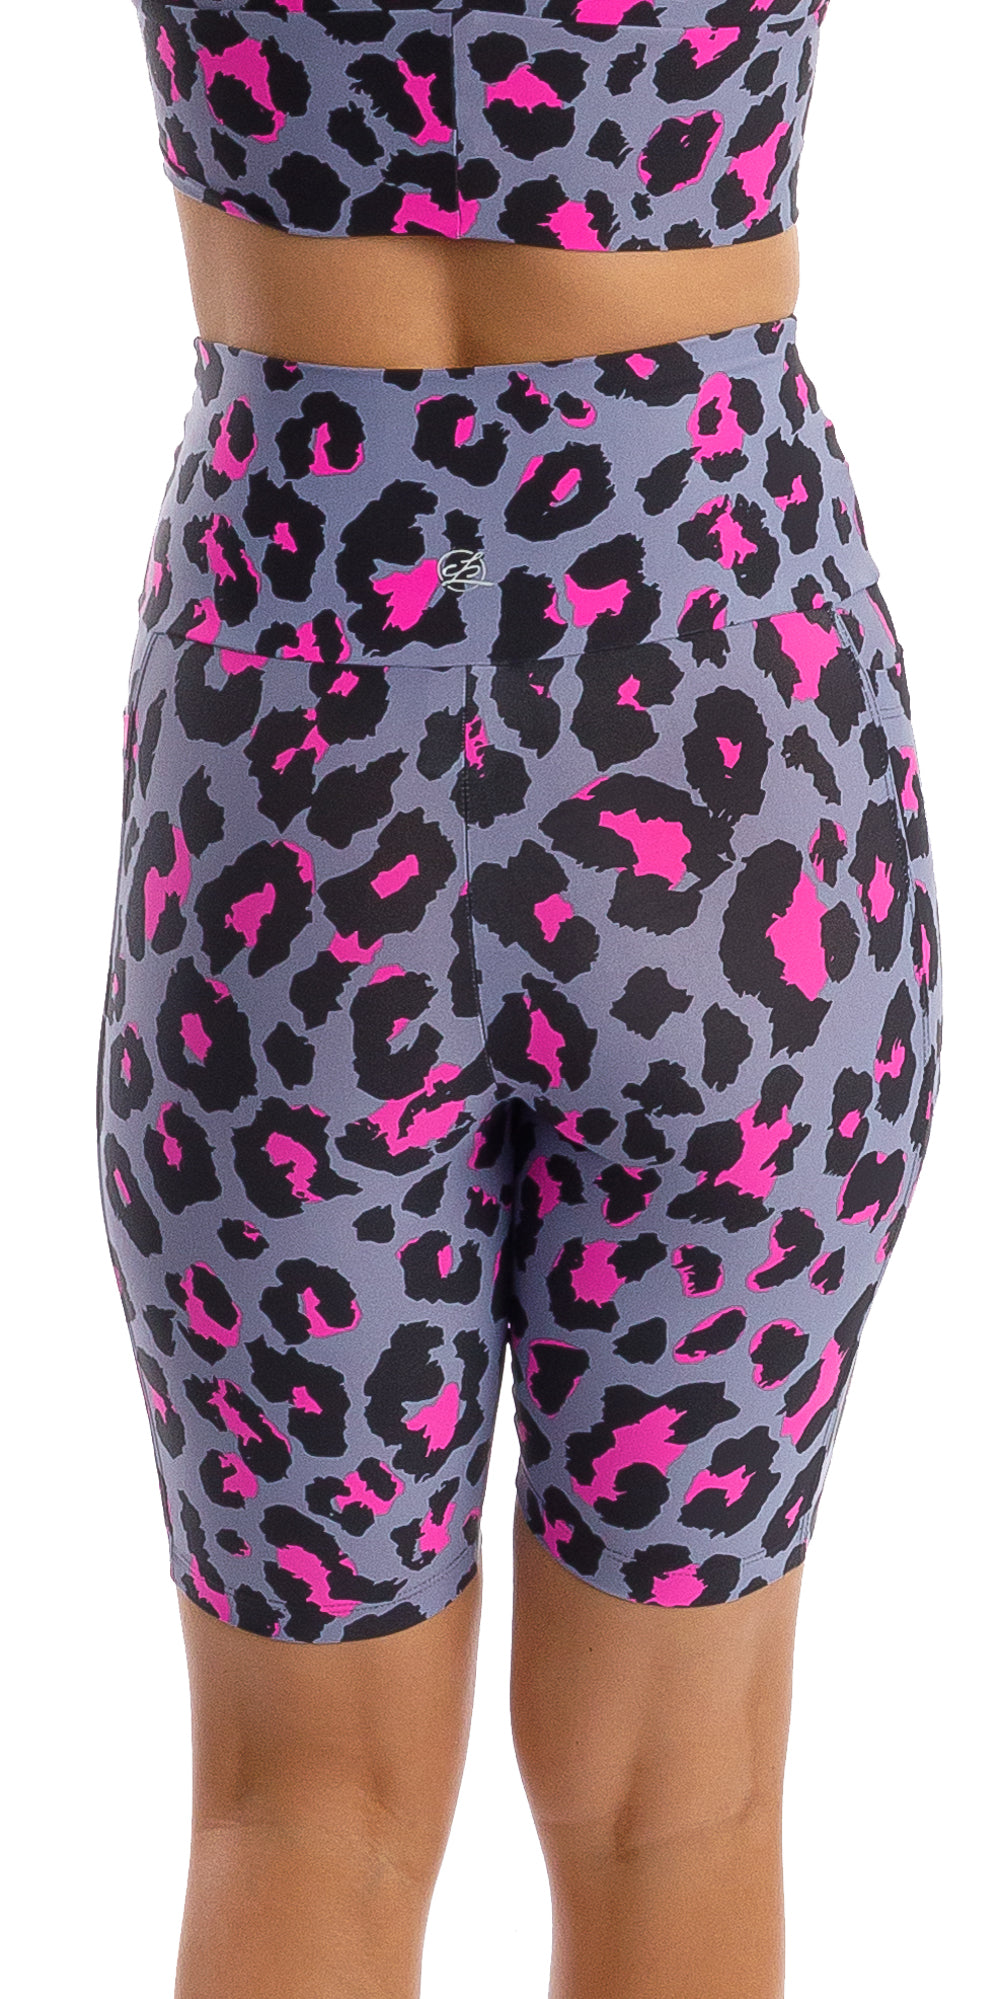 Rear view bottom part of girl in animal print Pink Leopard Eco Biker Shorts with Pockets